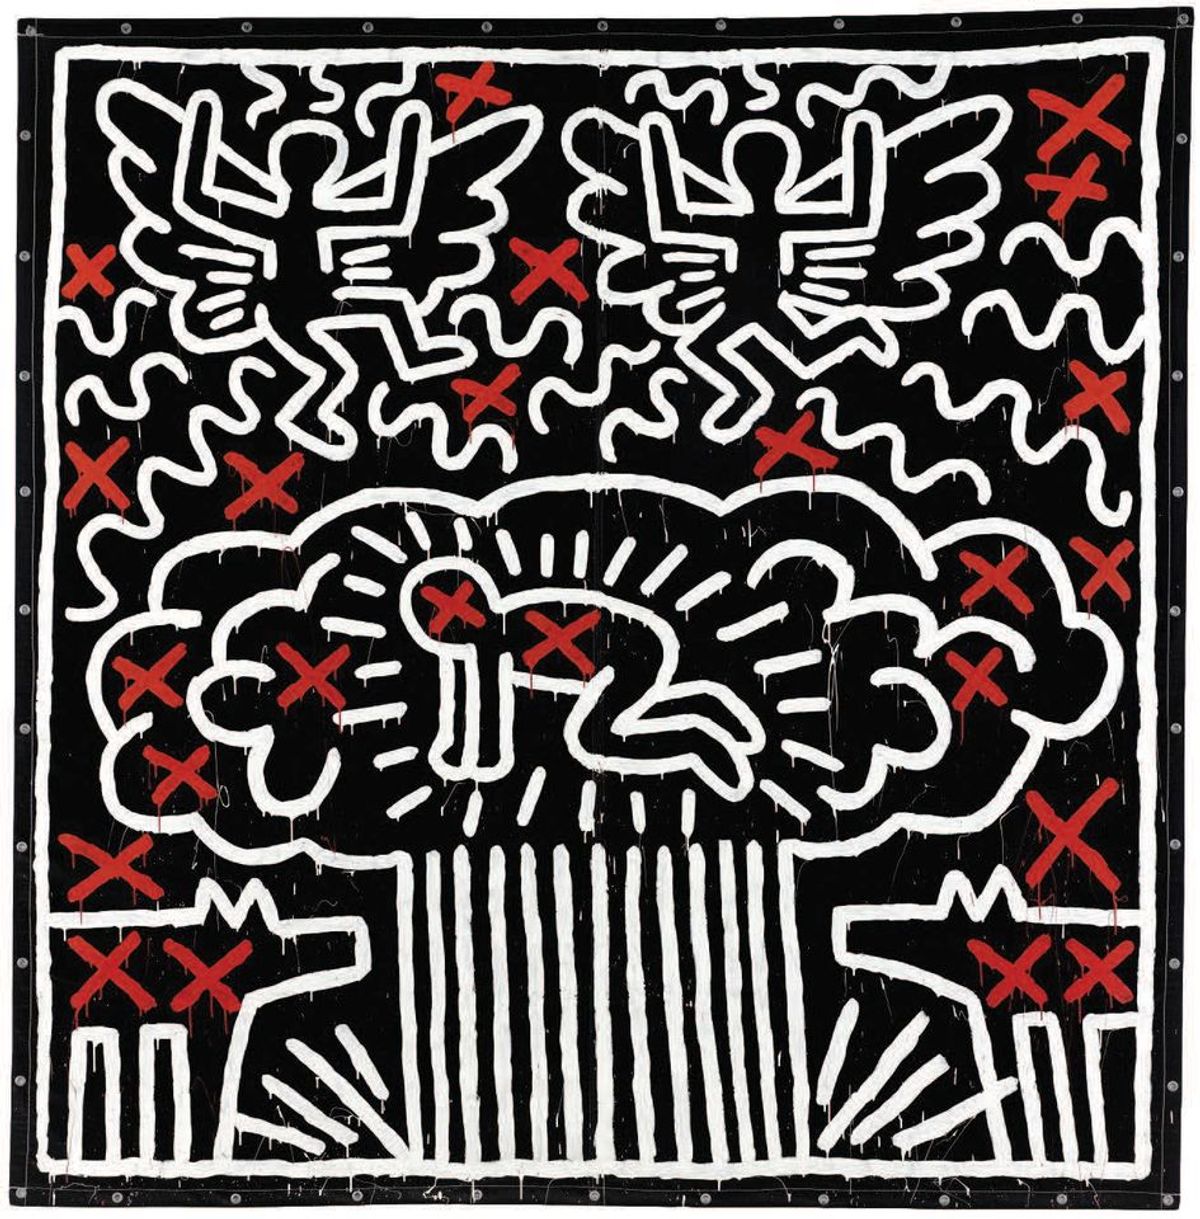 Keith Haring’s Untitled (1982) was sold for $6.5m at Sotheby’s in May 2017 but was never paid for © The Keith Haring Foundation via Sotheby’s